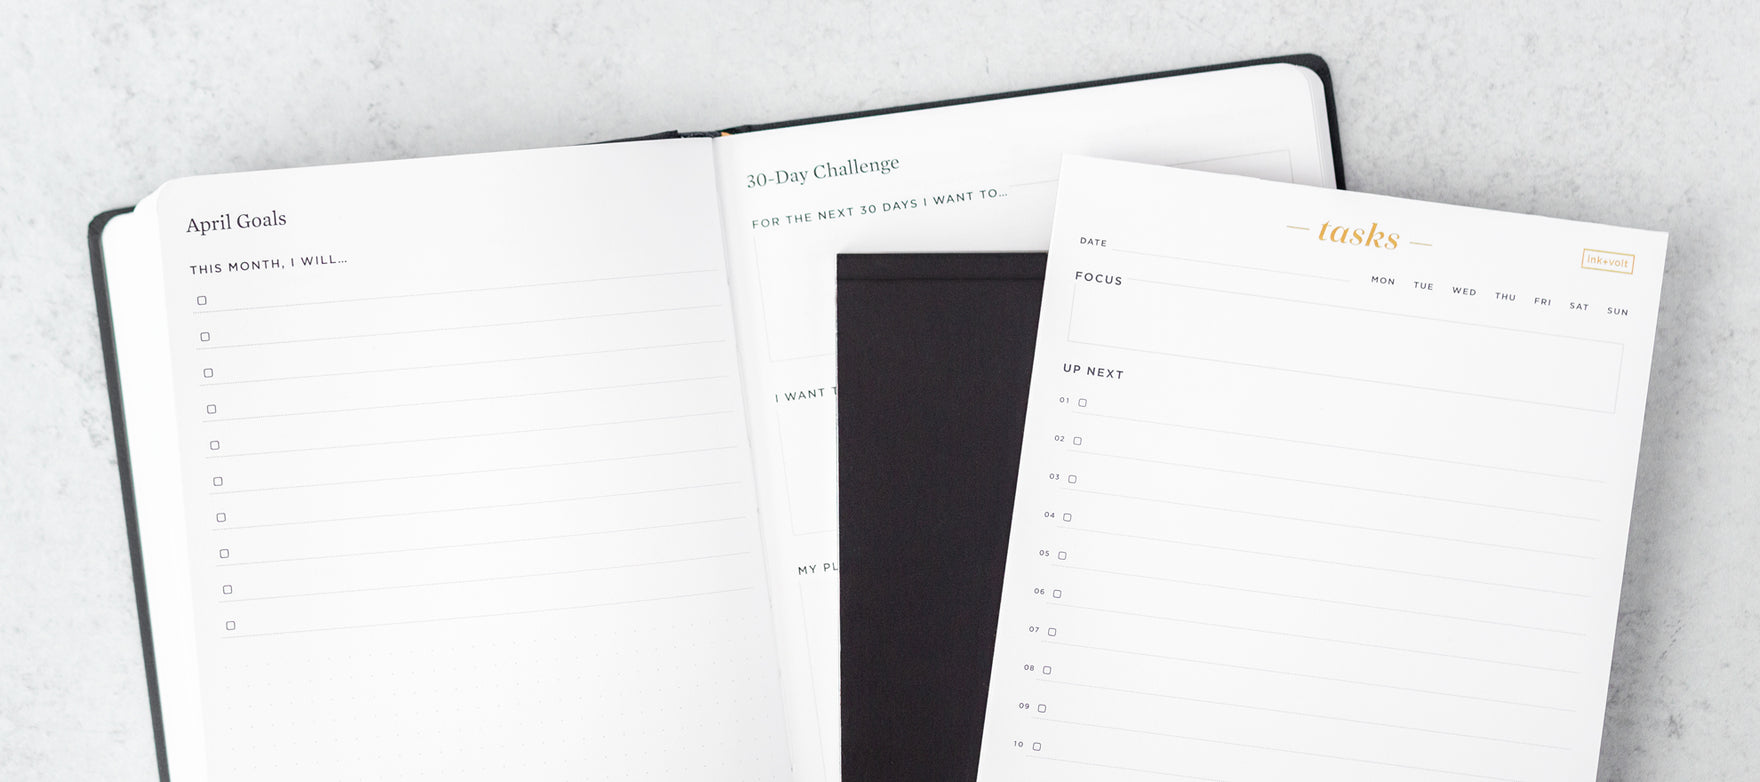 A planner is open to a 30 day challenge page, with a small stack of notepads on top.